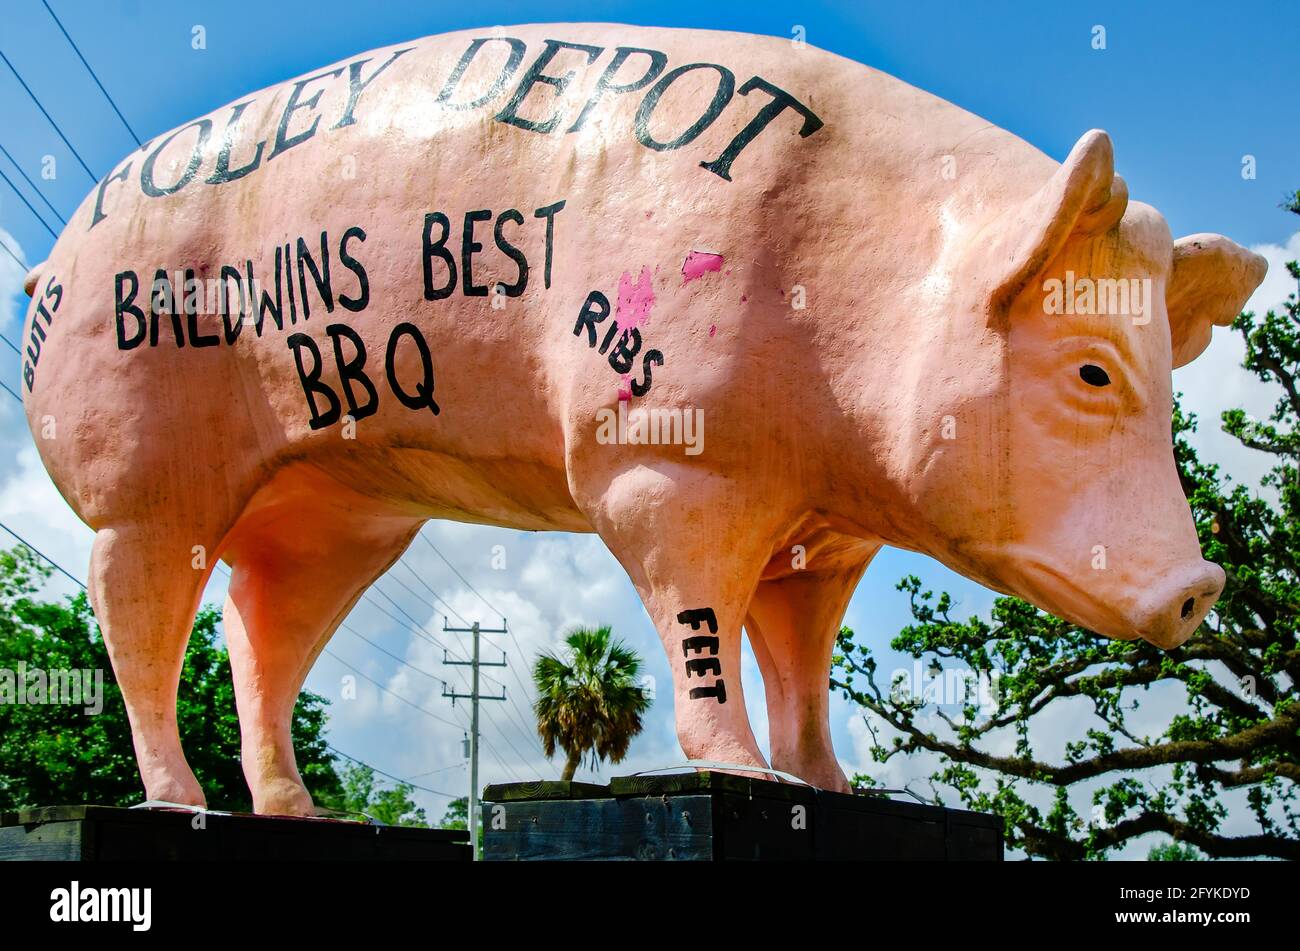 A pink pig statue advertises the Carolina-style barbecue at Foley Depot gas station, May 27, 2021, in Foley, Alabama. Stock Photo